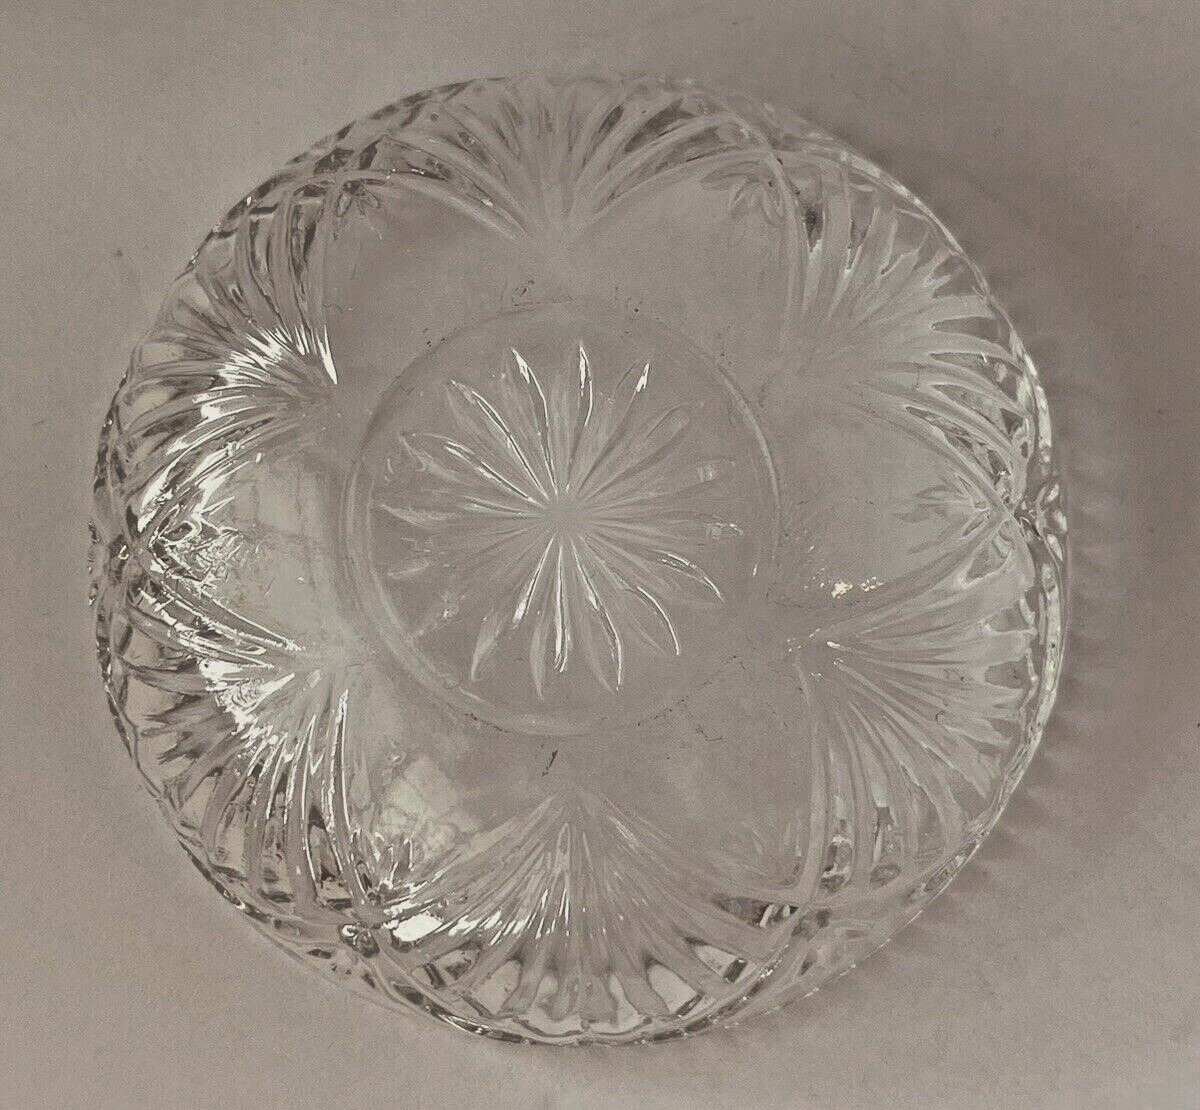 Vintage Darby Round Crystal Cut Glass Small Bowl Trinket Candy Whatnot Dish